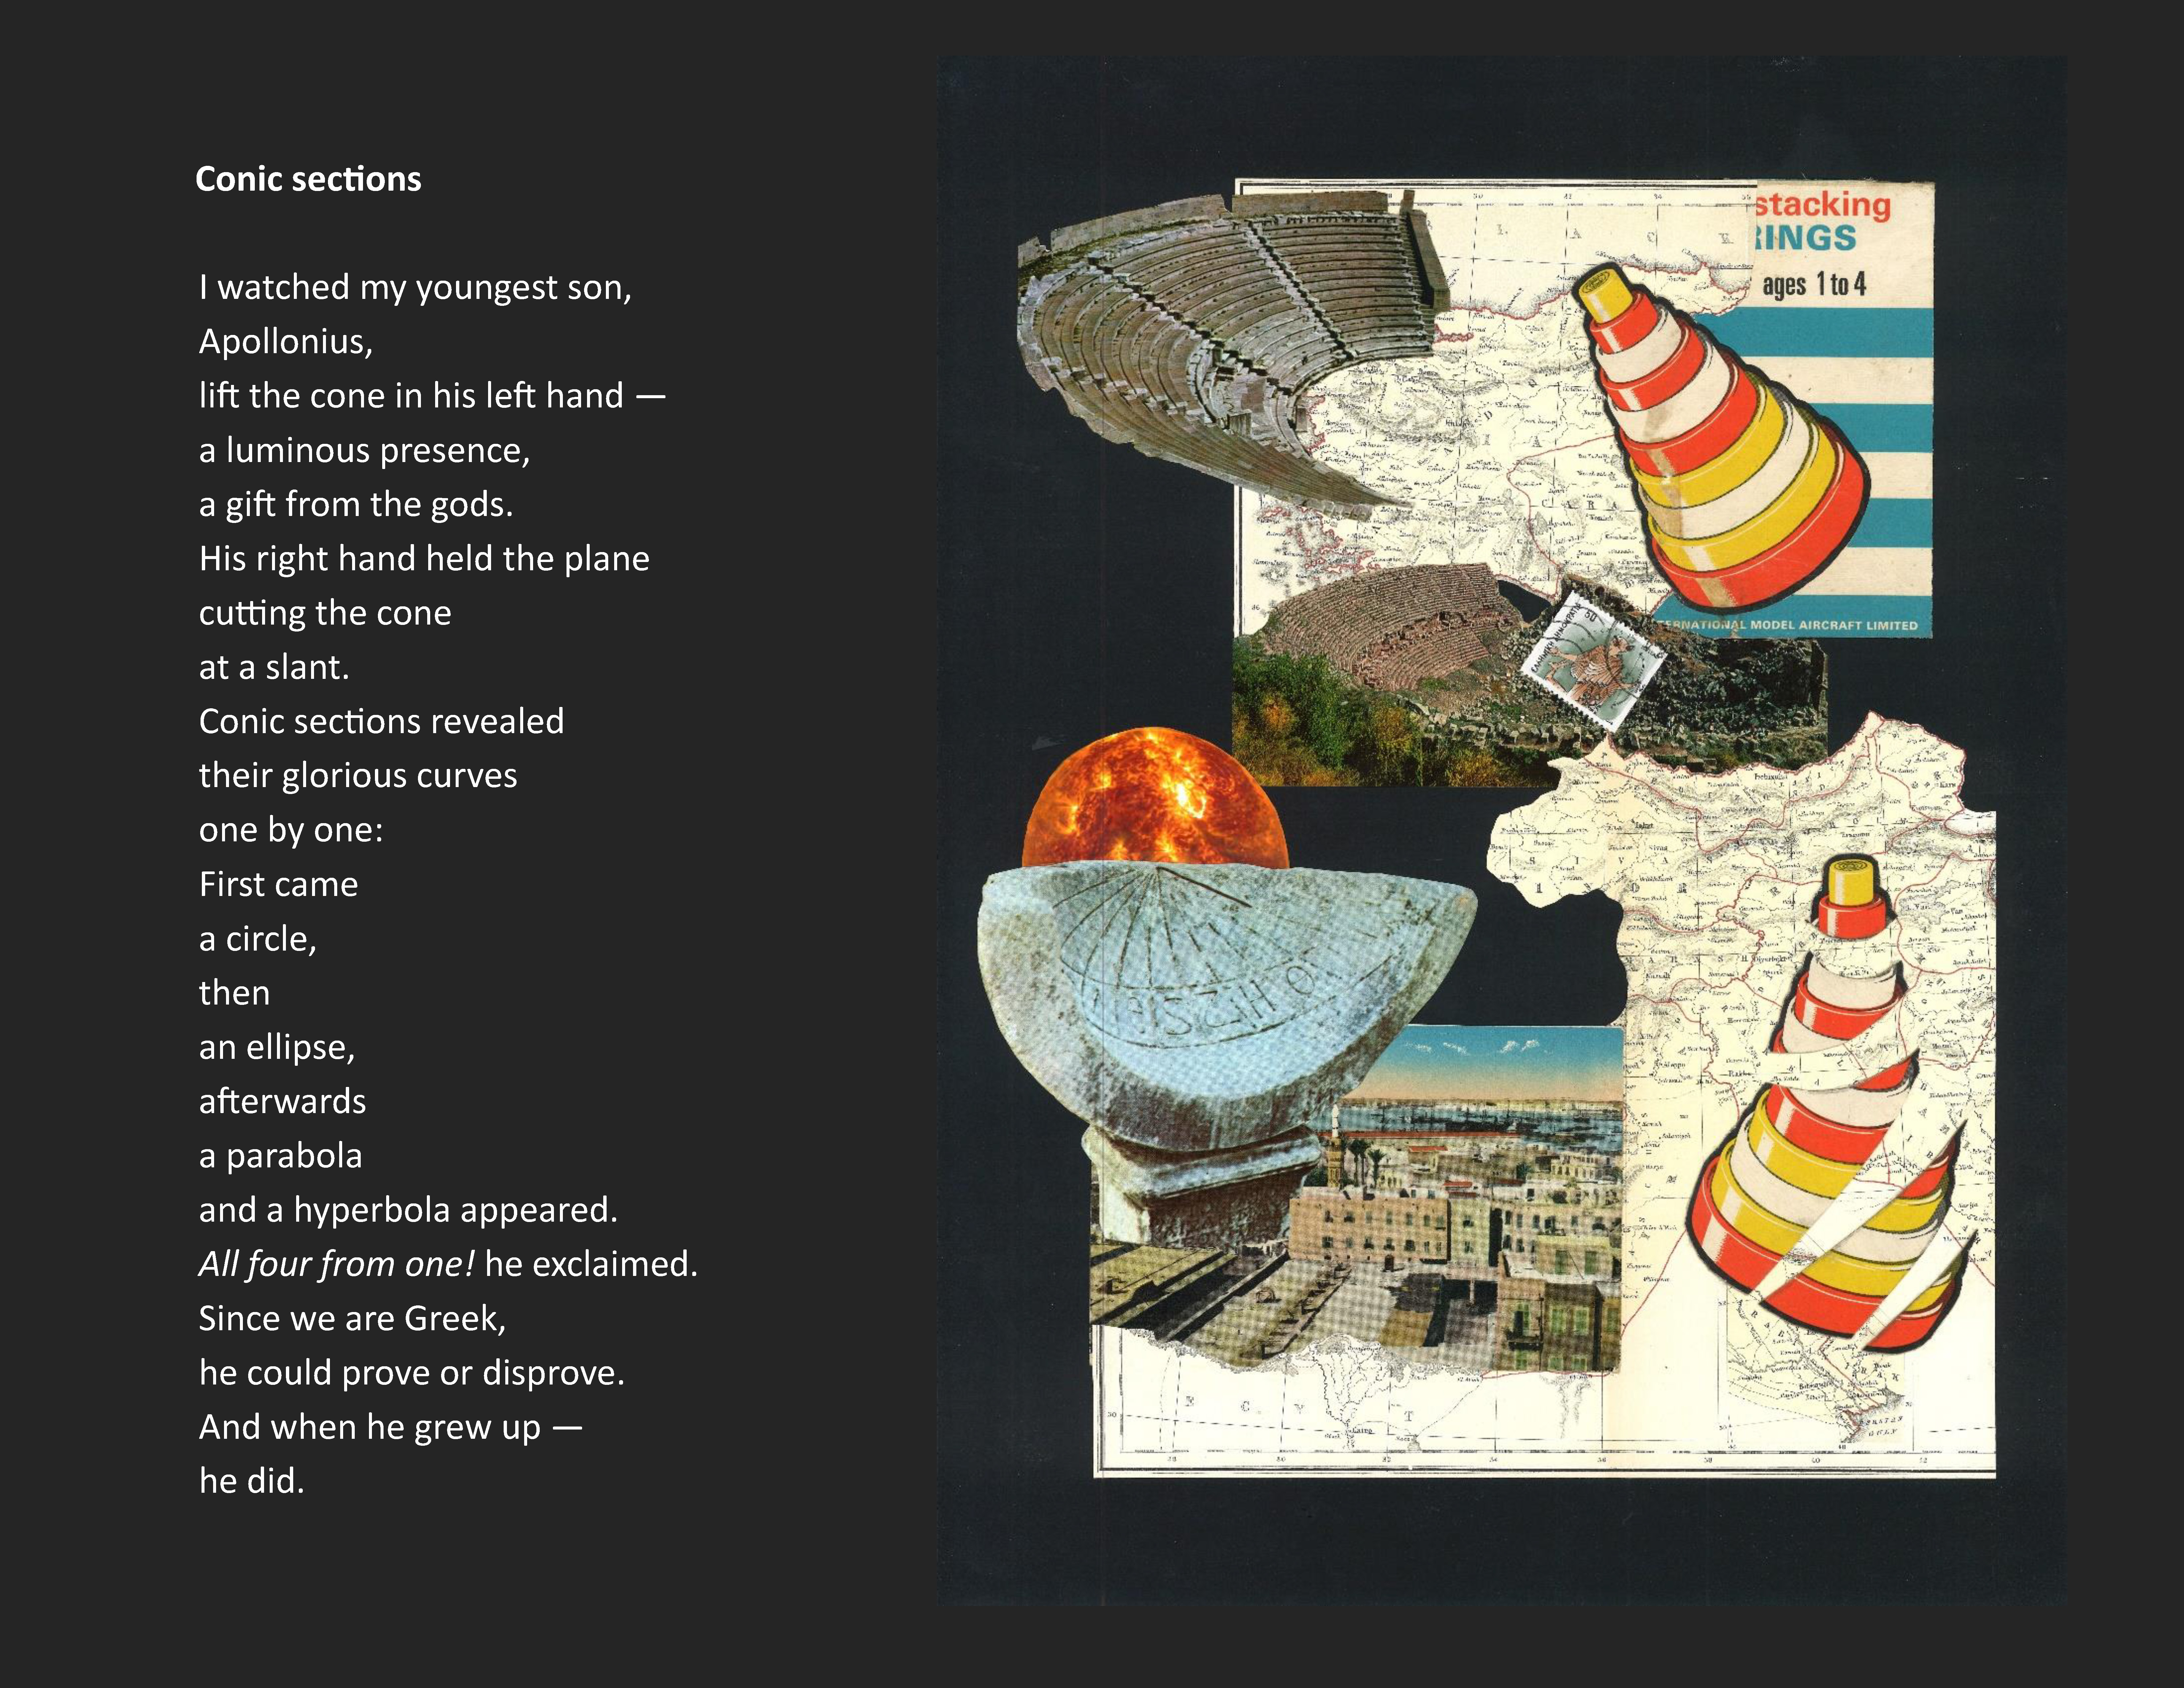 Conic sections poem-collage pair